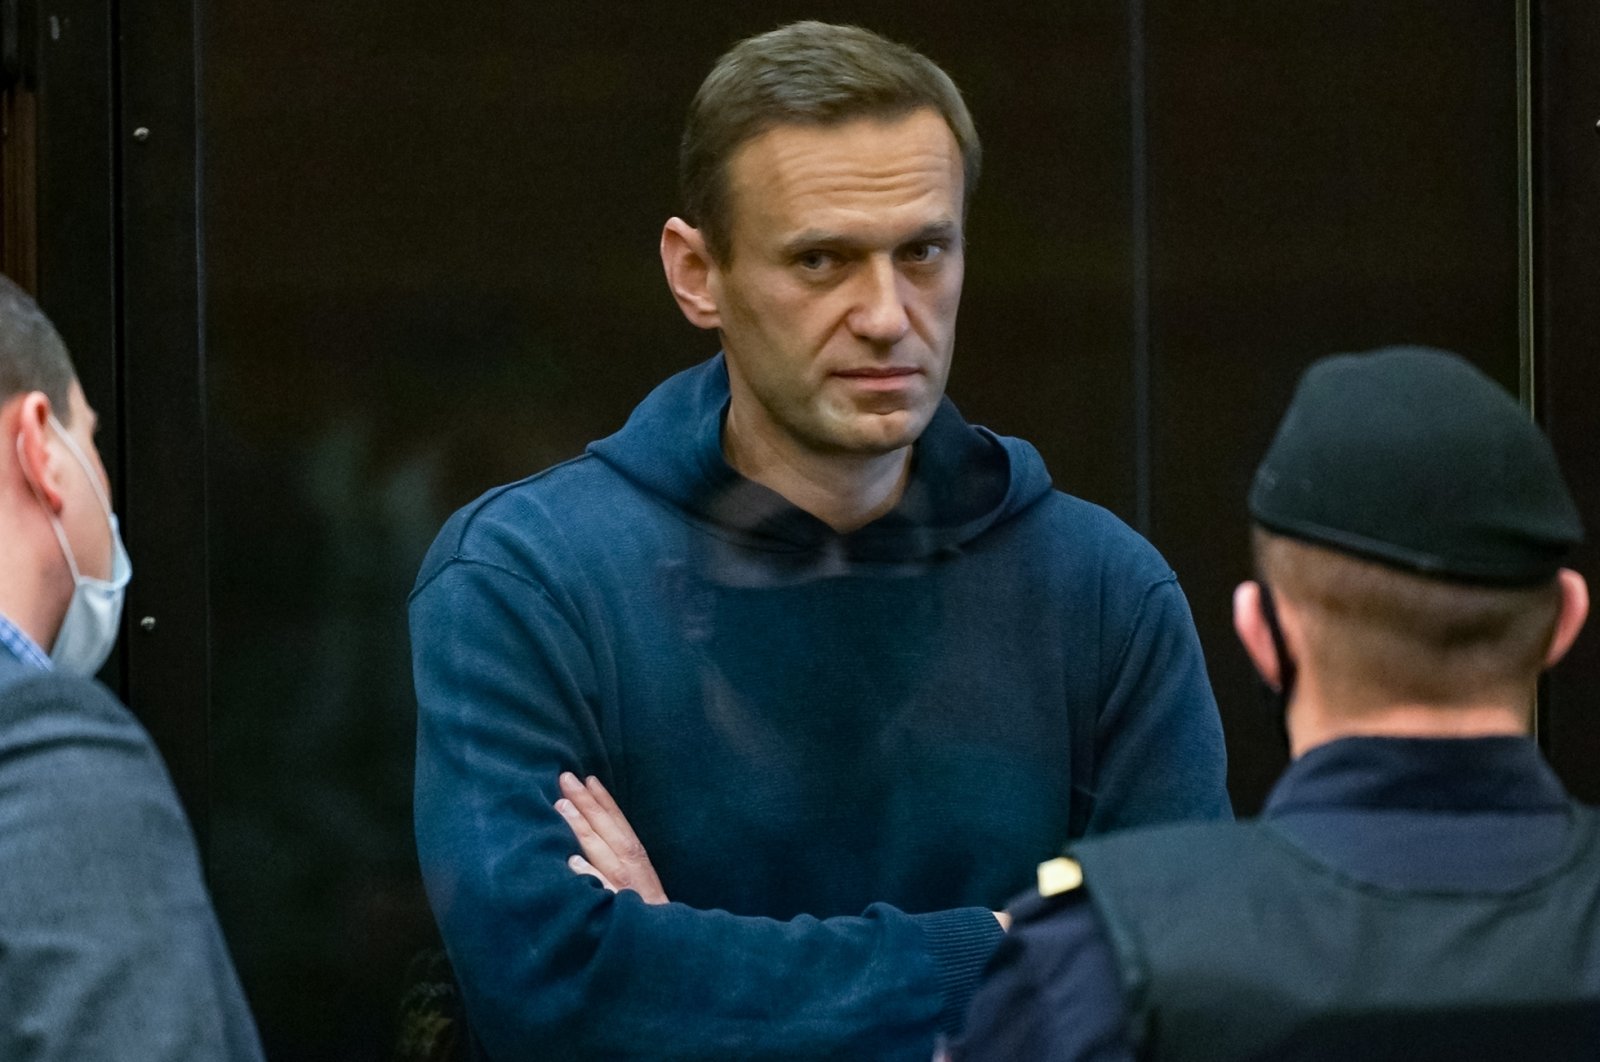 Russian opposition figure Alexei Navalny stands inside a glass cell during a court hearing in Moscow, Russia on Feb. 2, 2021. (Moscow City Court Press Service via AFP)